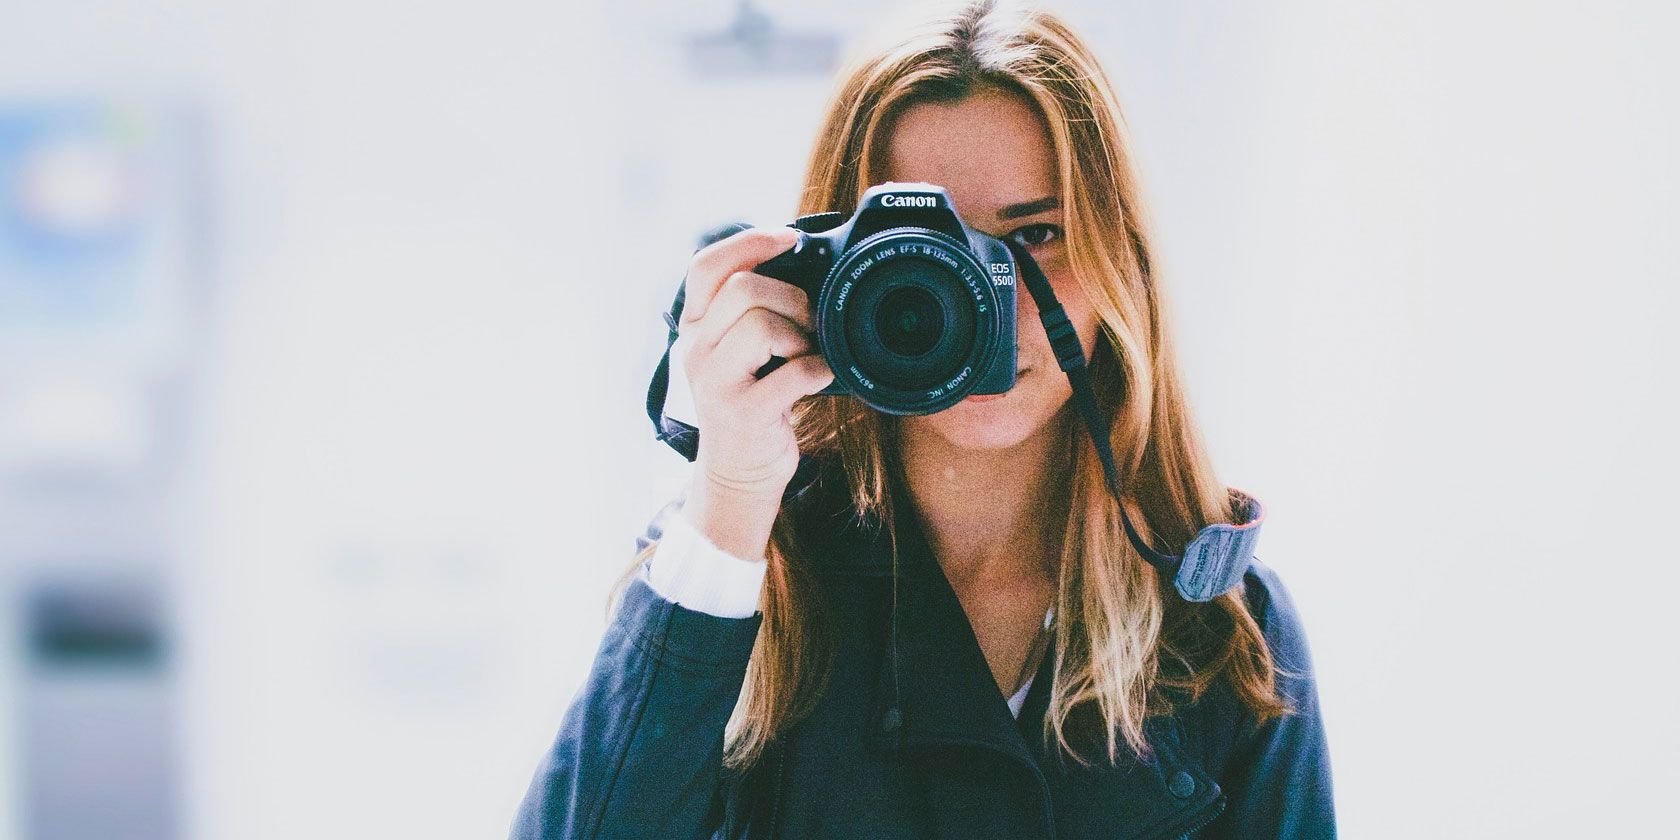 18 Creative Photography Ideas for Beginners to Improve Their Skills